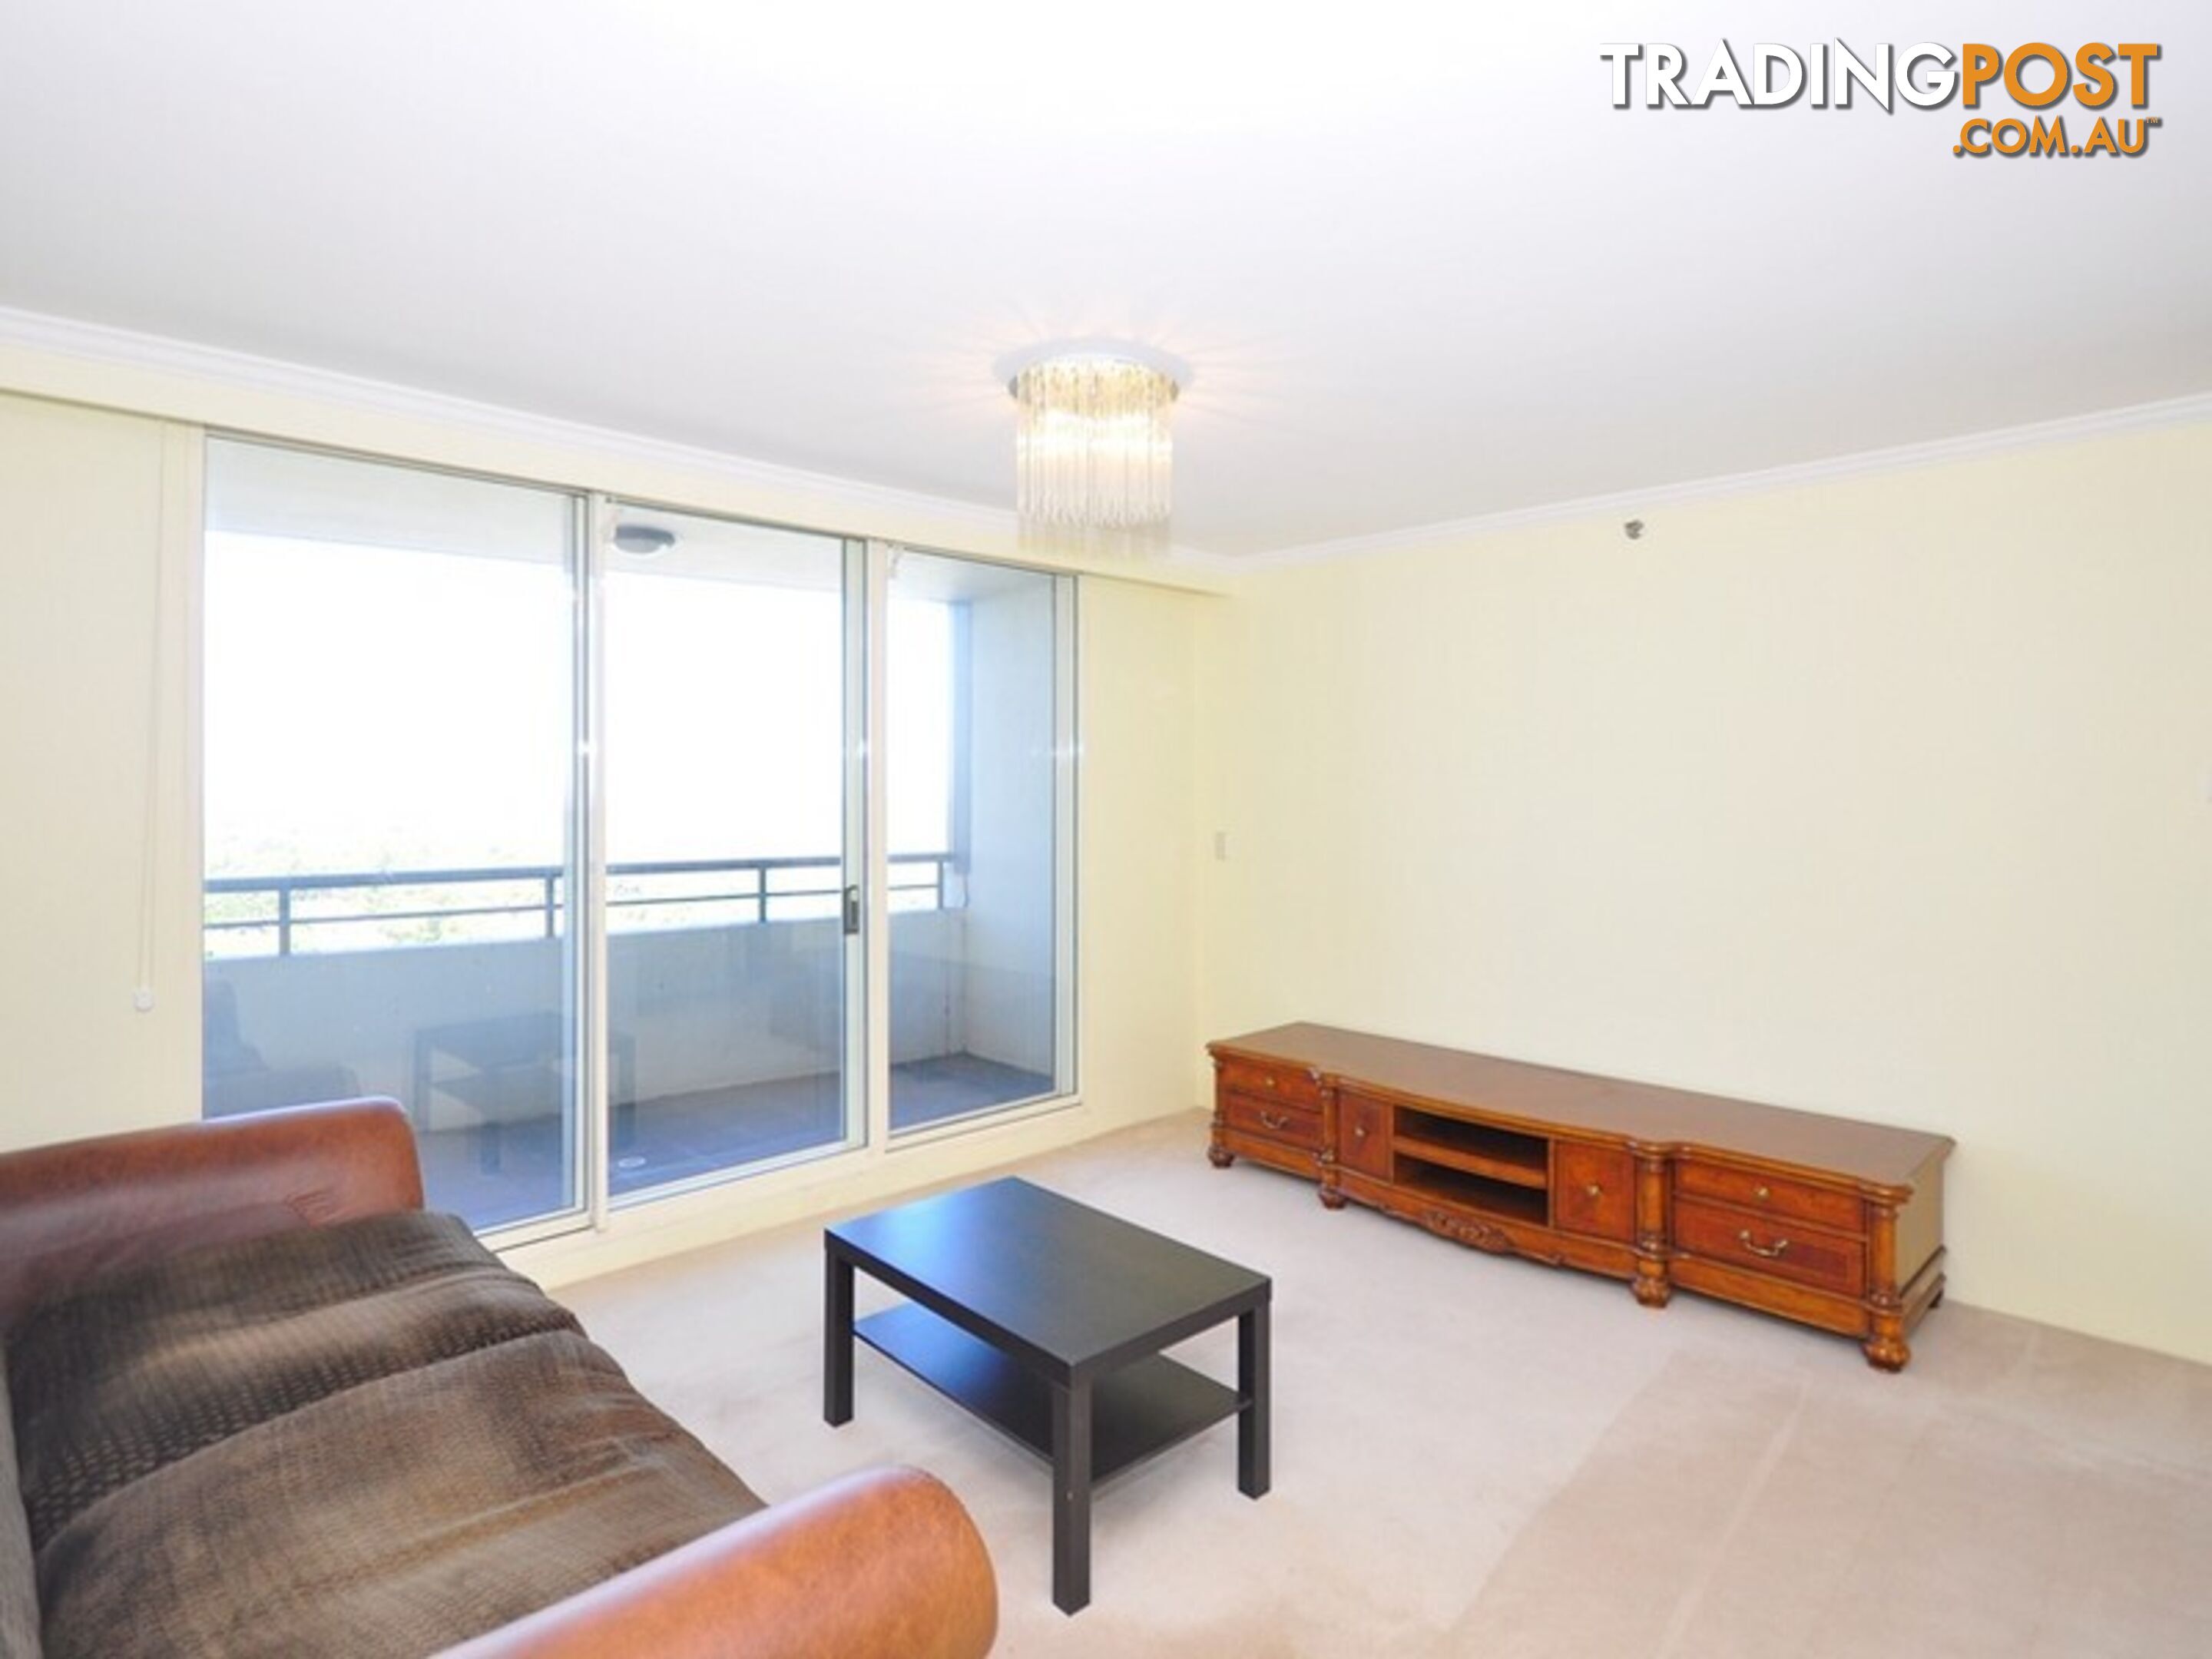 98/14 Brown Street CHATSWOOD NSW 2067